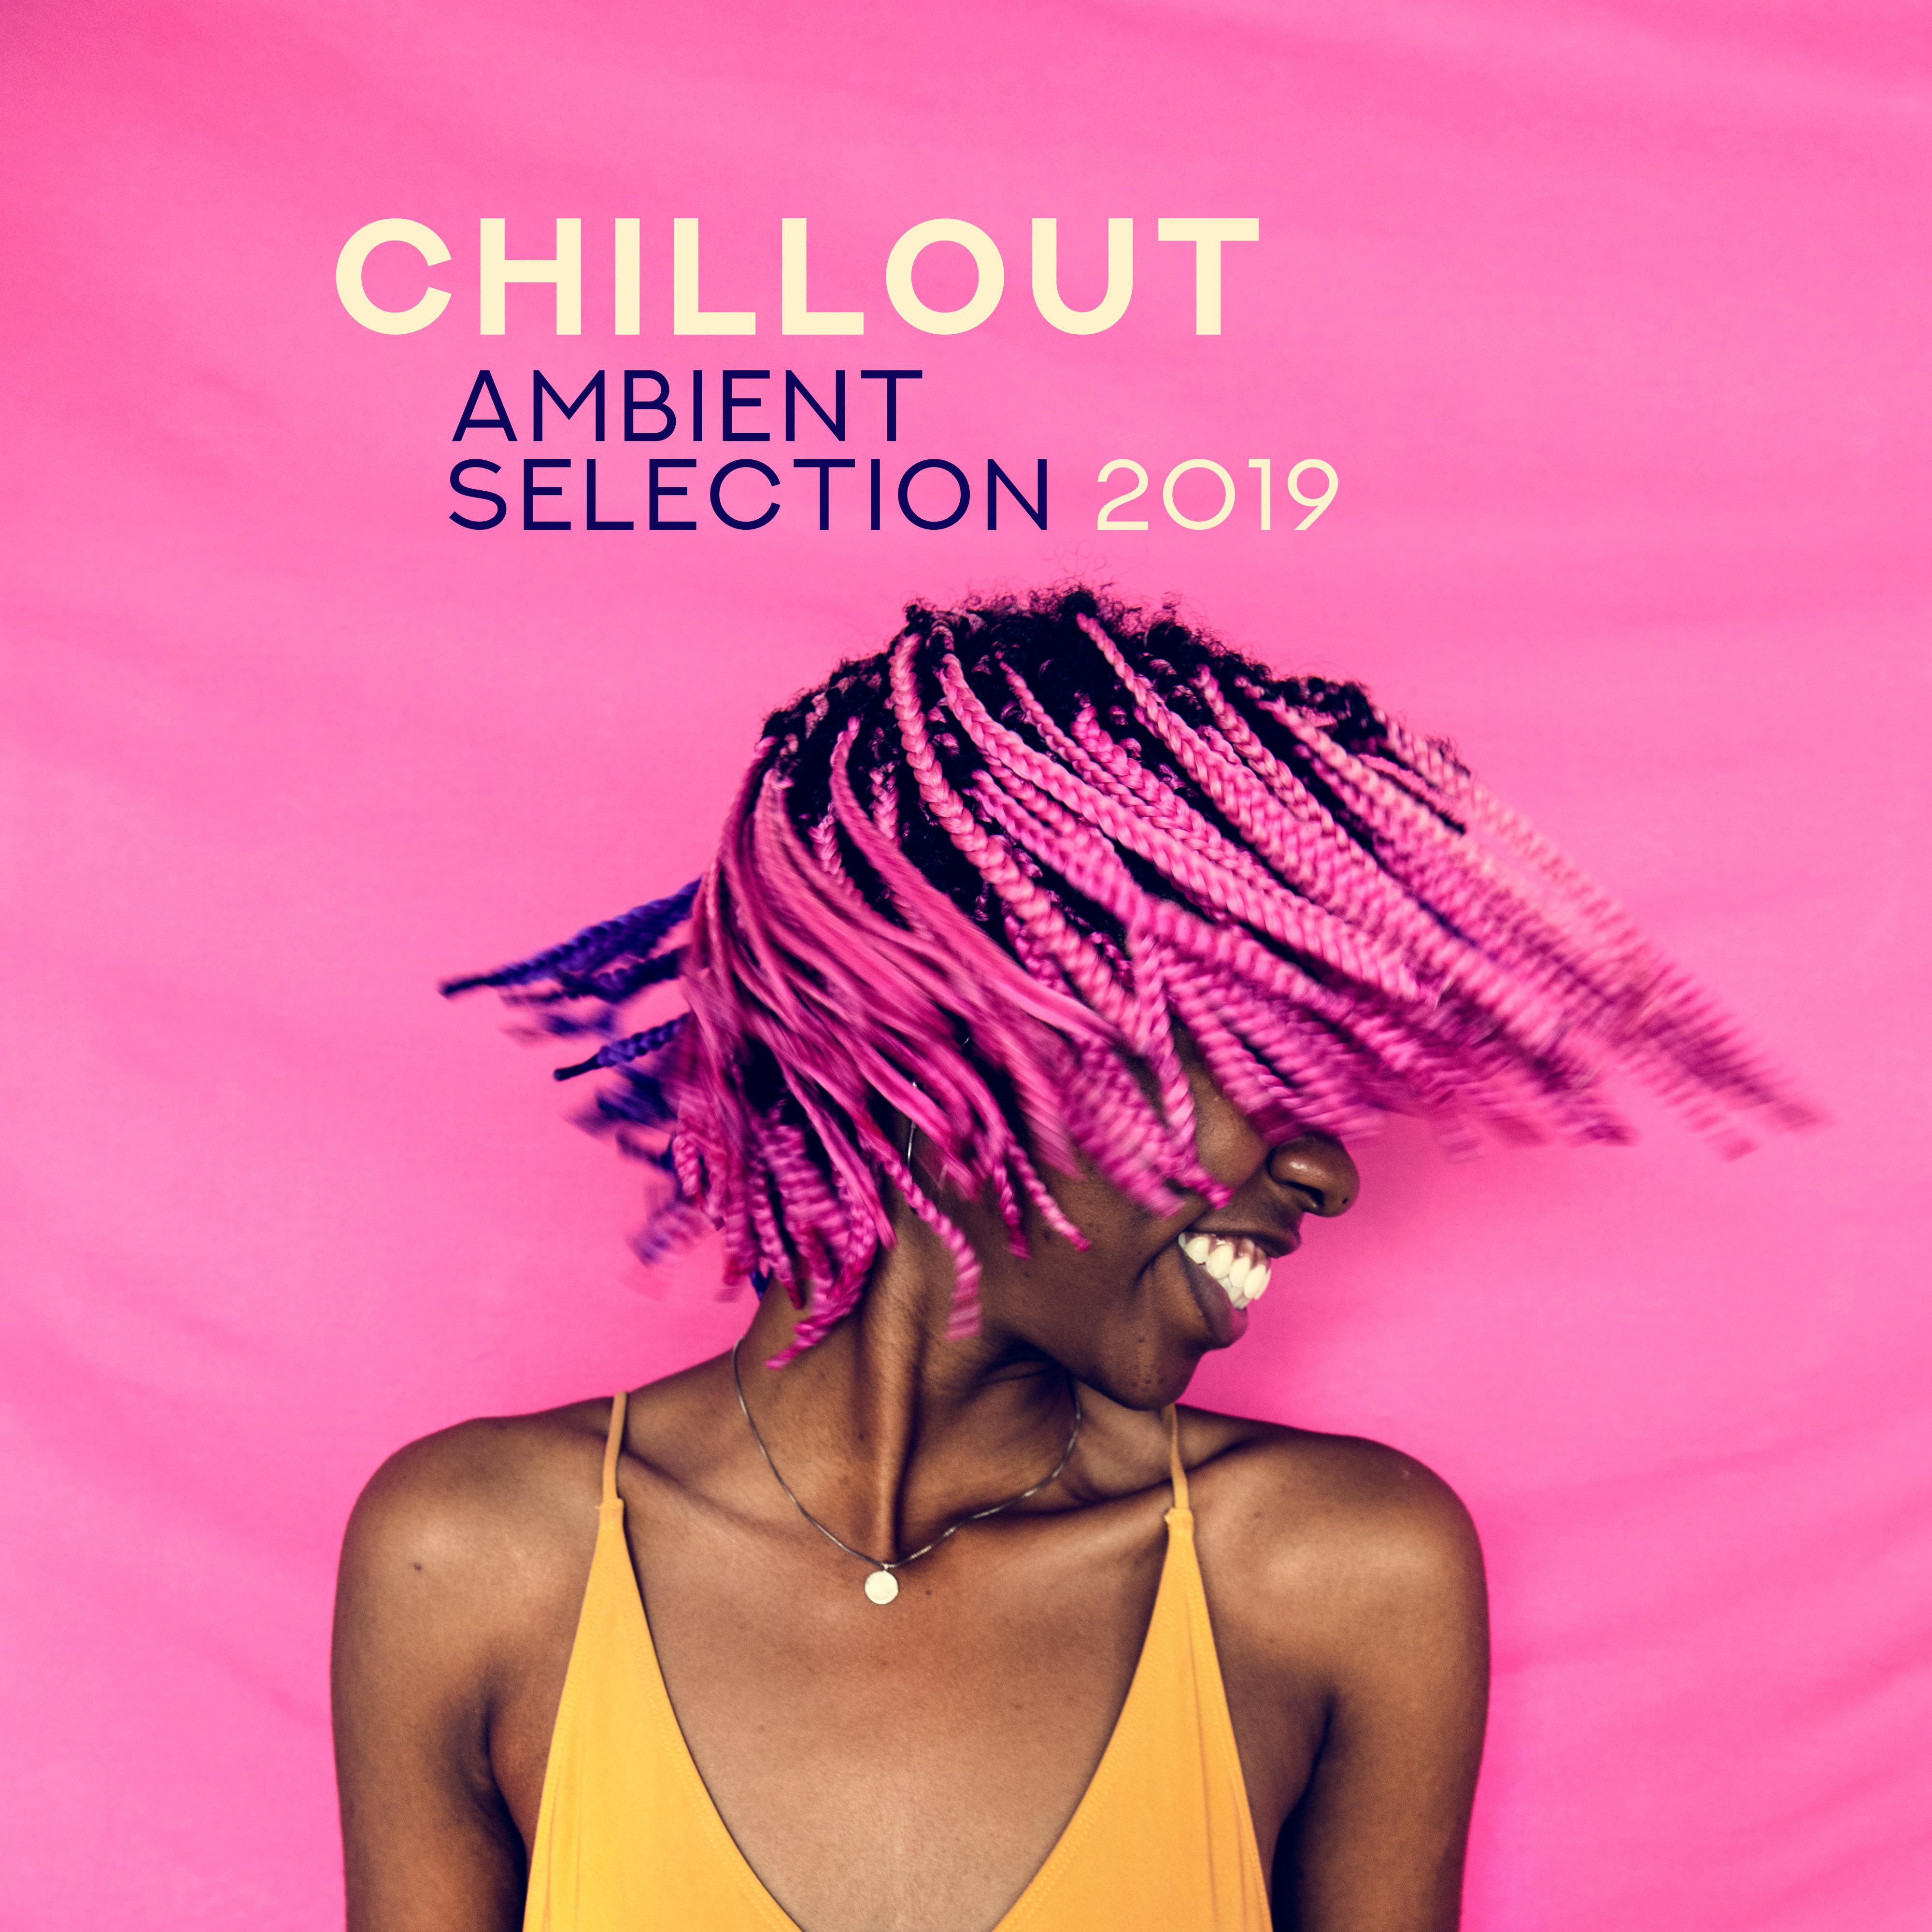 Chillout Ambient Selection 2019: 15 Electronic Deep Emotional & Summer Relax Vibes for Total Relaxation, Calming Down, Music with Soothing Melodies for Intimate Moments